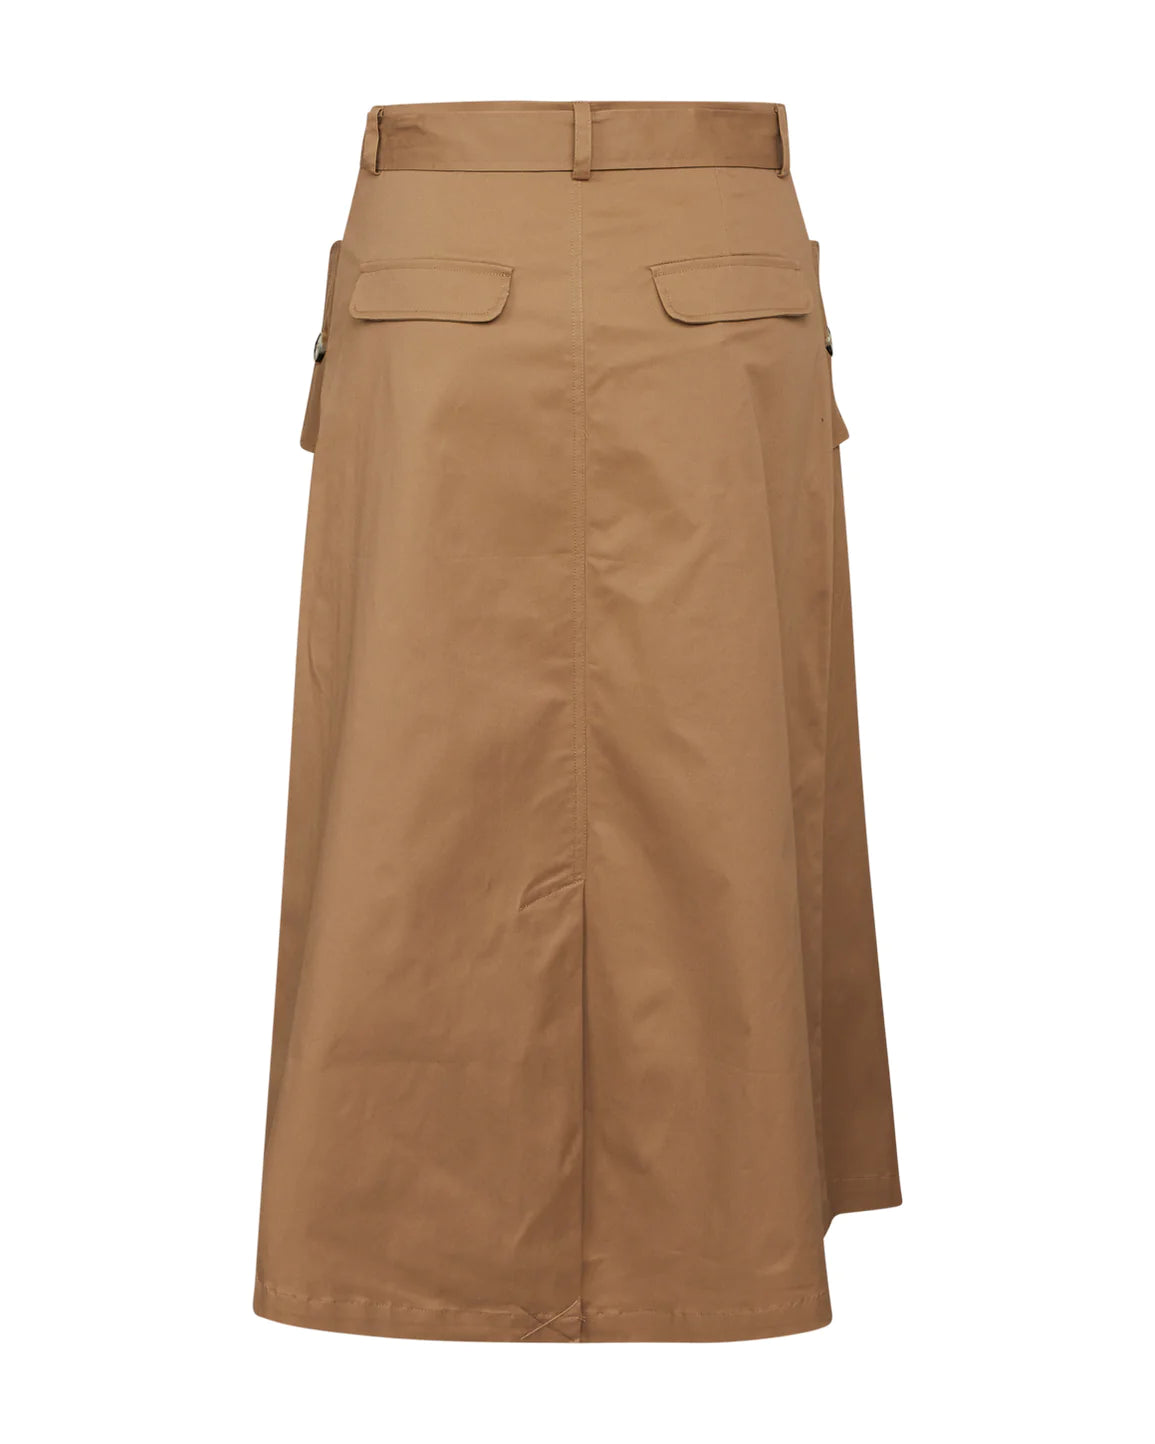 Andy Skirt - Camel